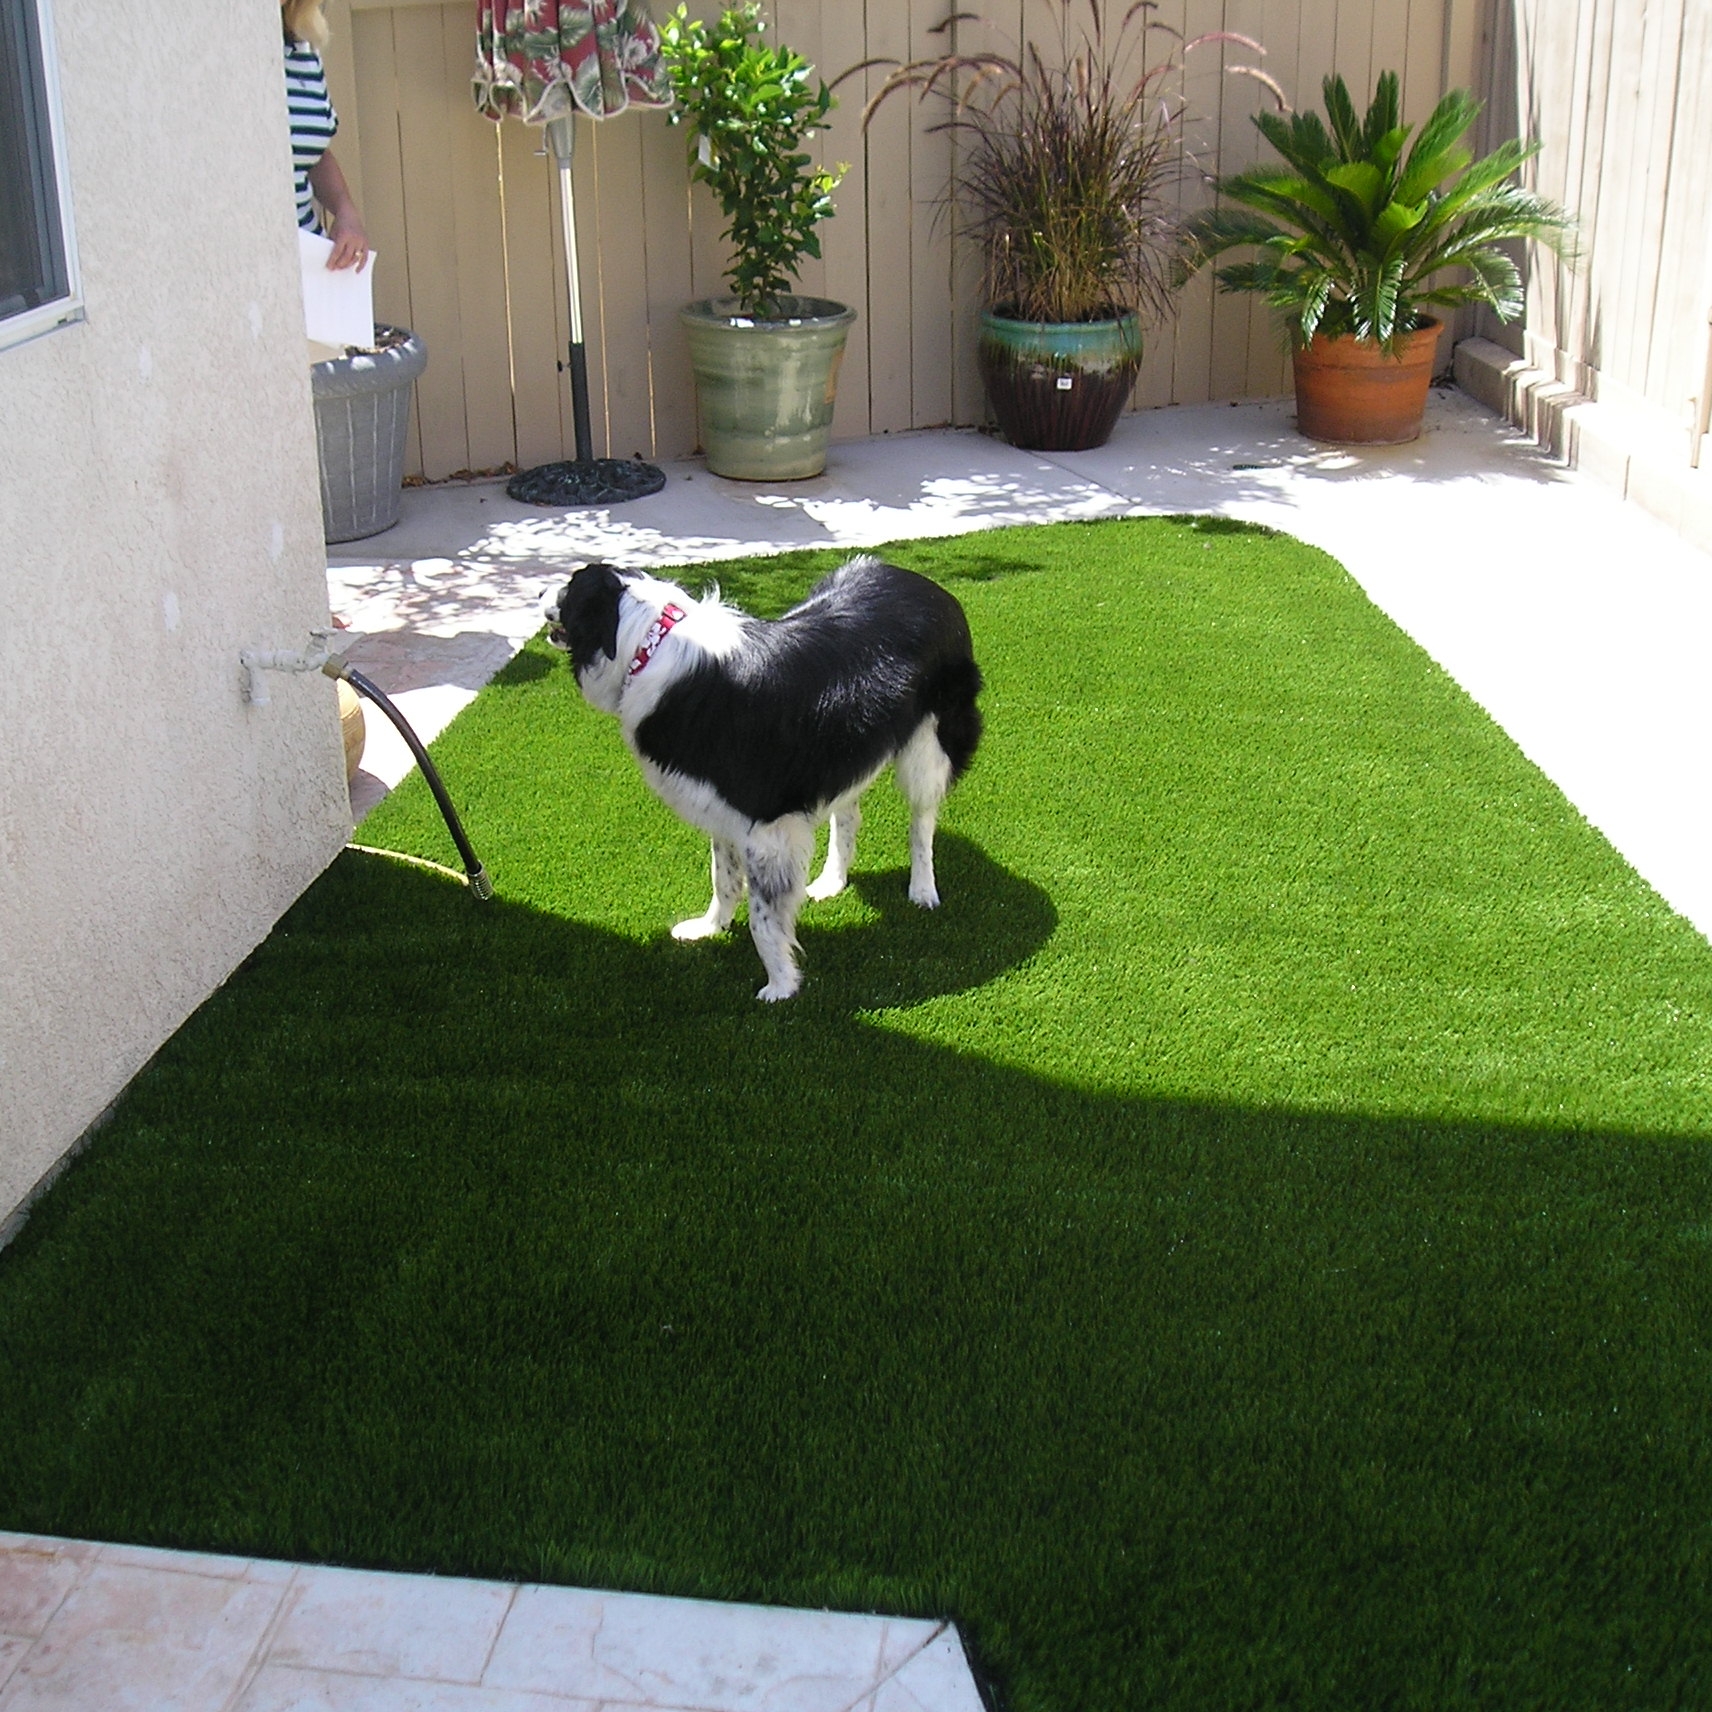 S Blade-90 landscaping with artificial grass,grass looking rug,real looking fake grass,real looking artificial grass,artificial grasses,fake grasses,grass looking rug,real looking fake grass,real looking artificial grass